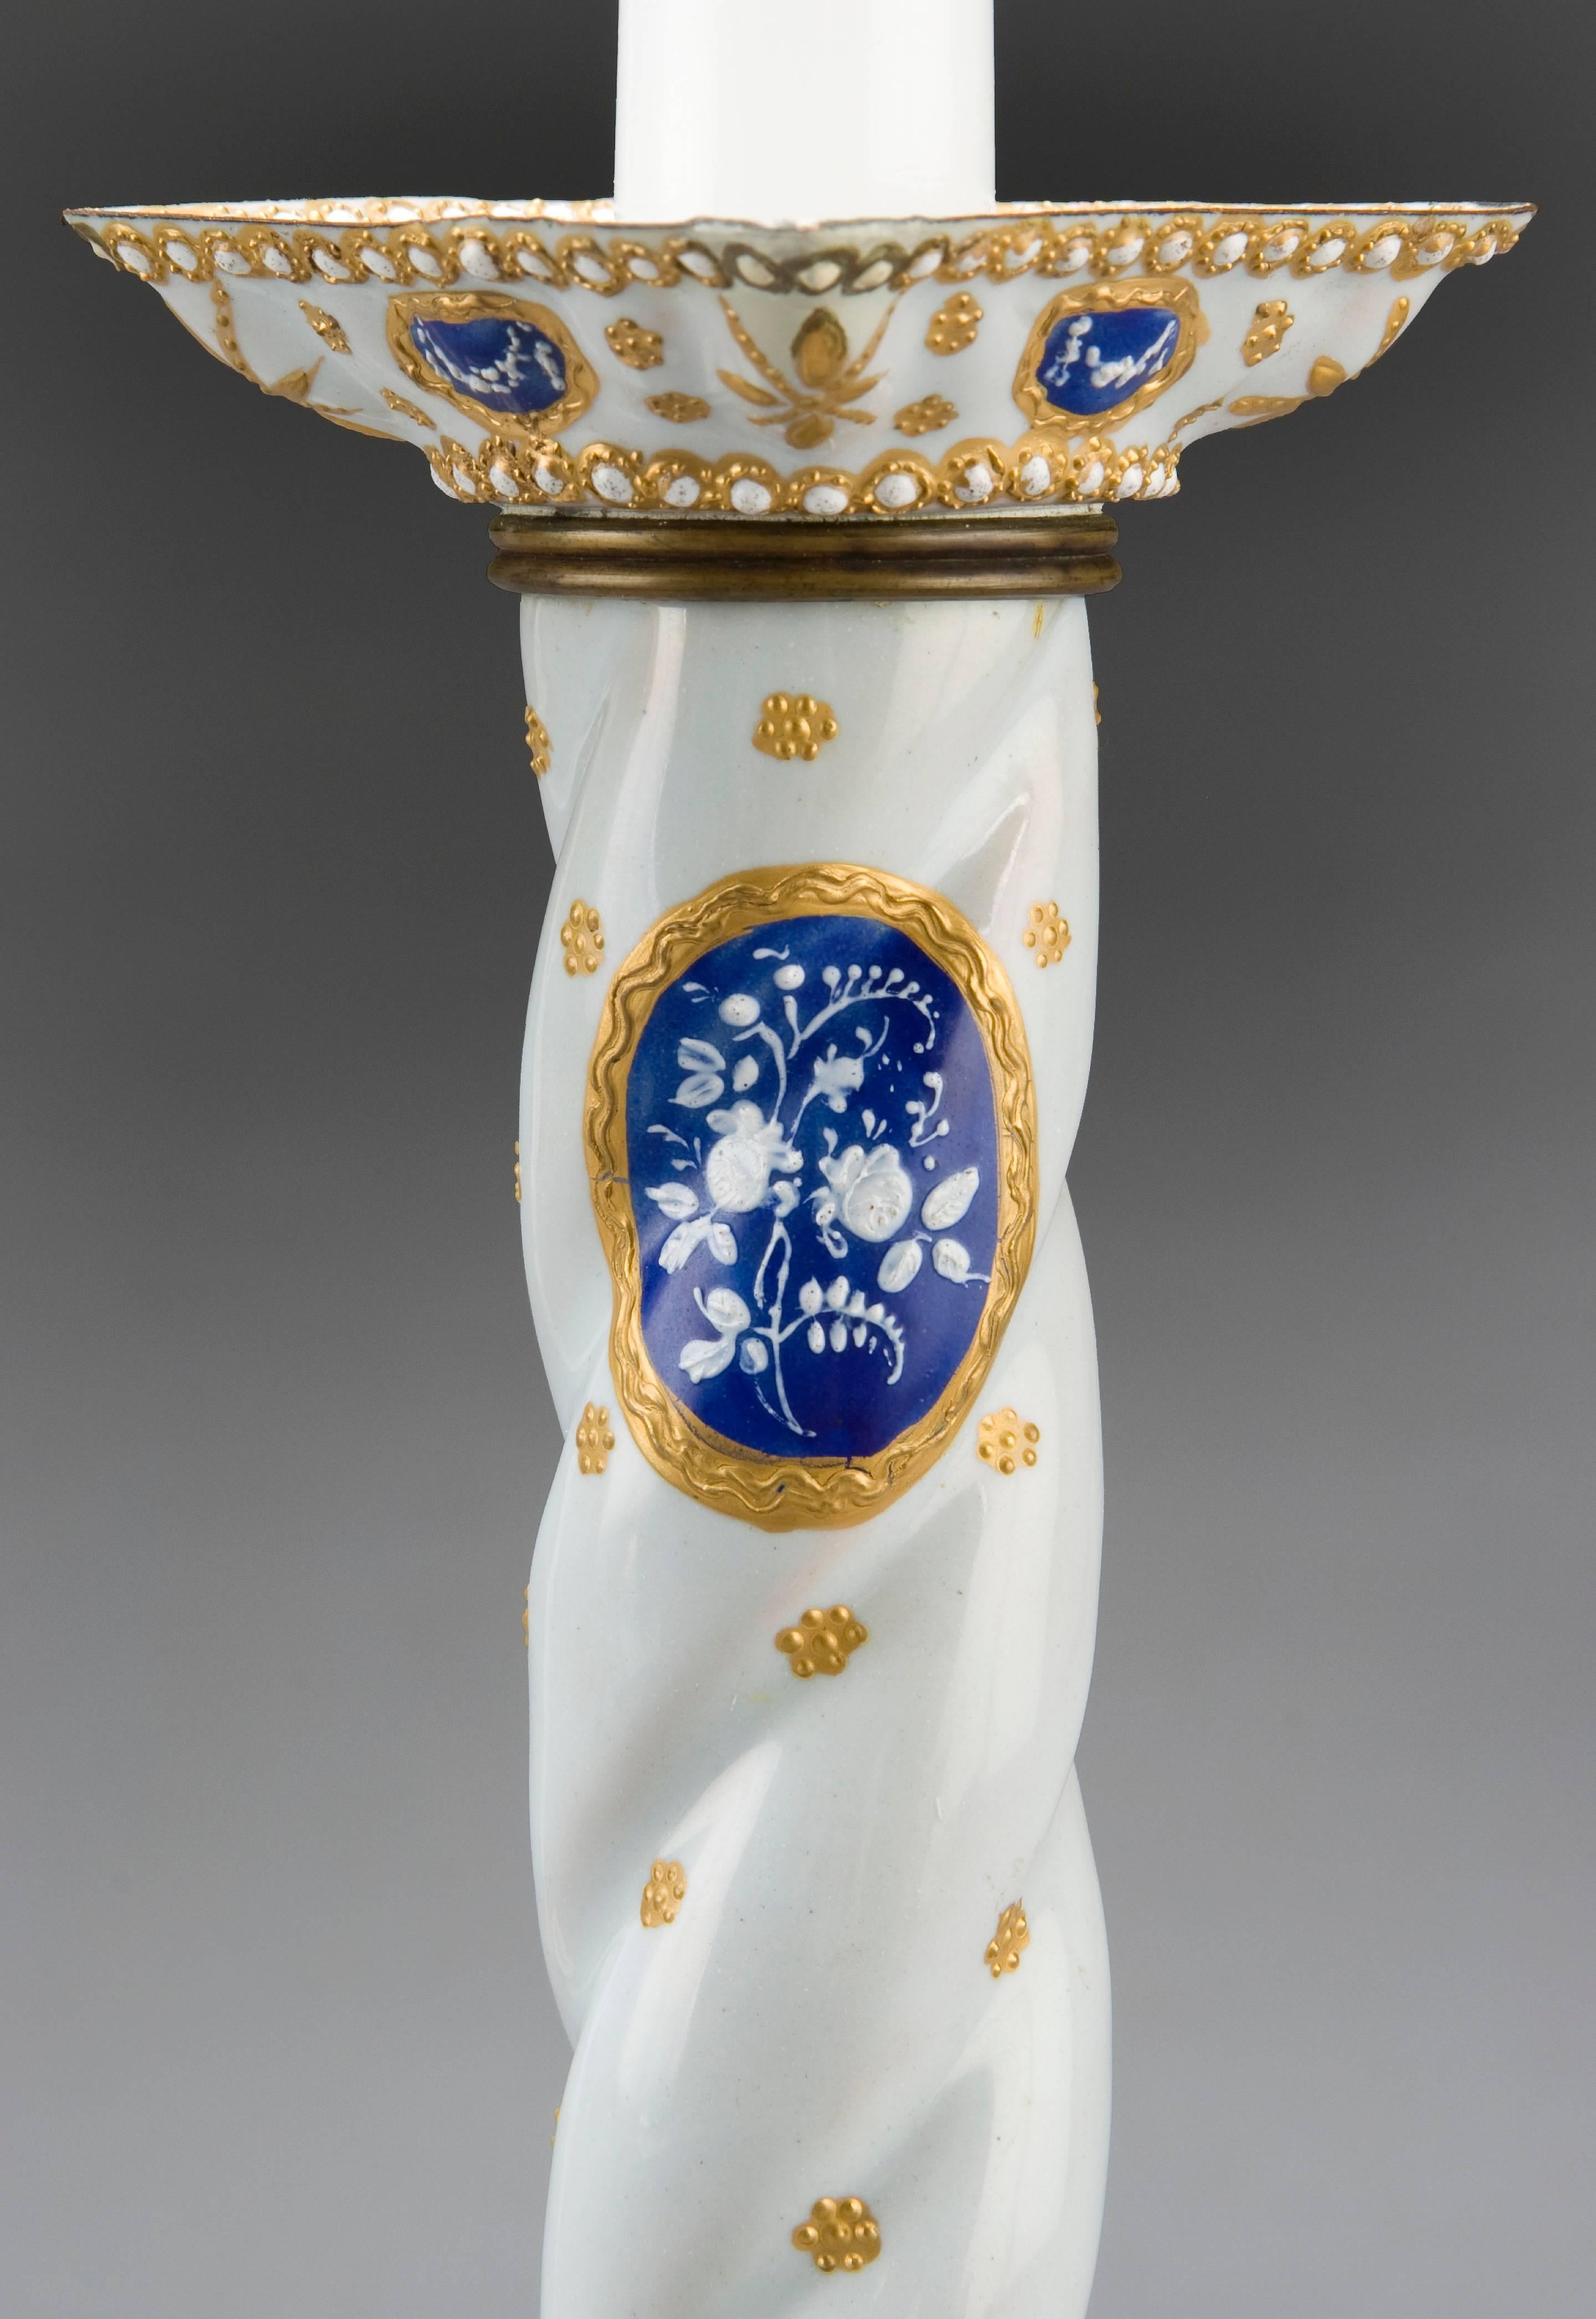 Charming and fine example of Staffordshire enamel ware. Each with spiral stems above square tapering bases, decorated with gilt-edged blue oval panels of white flowers. 

Very good antique condition with expert minor repairs, overall a delightful